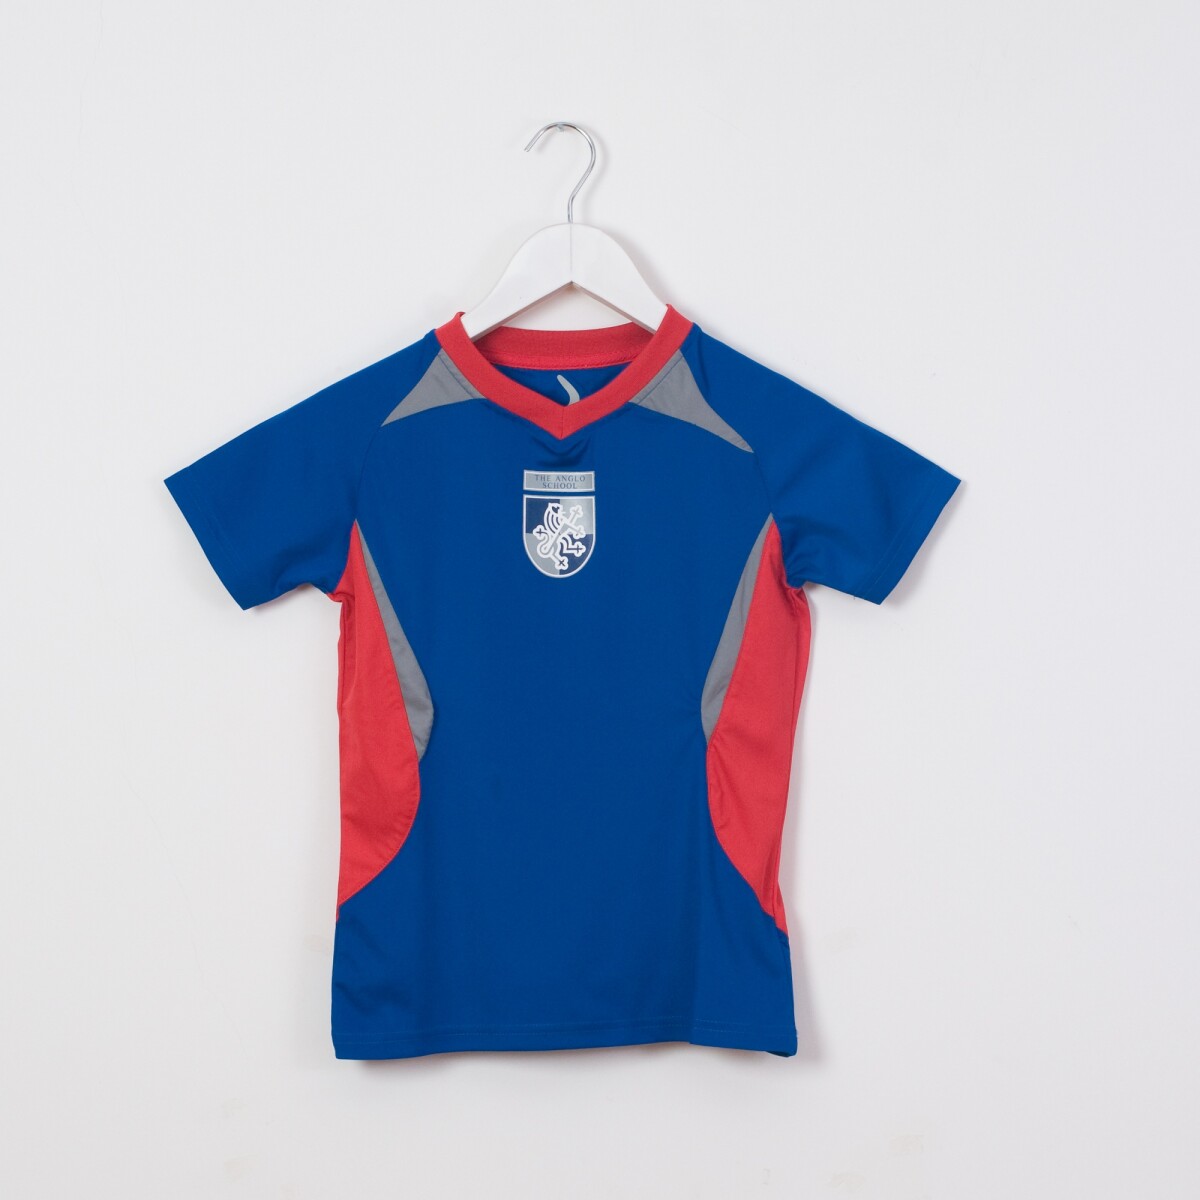 Remera Fútbol The Anglo School Blue